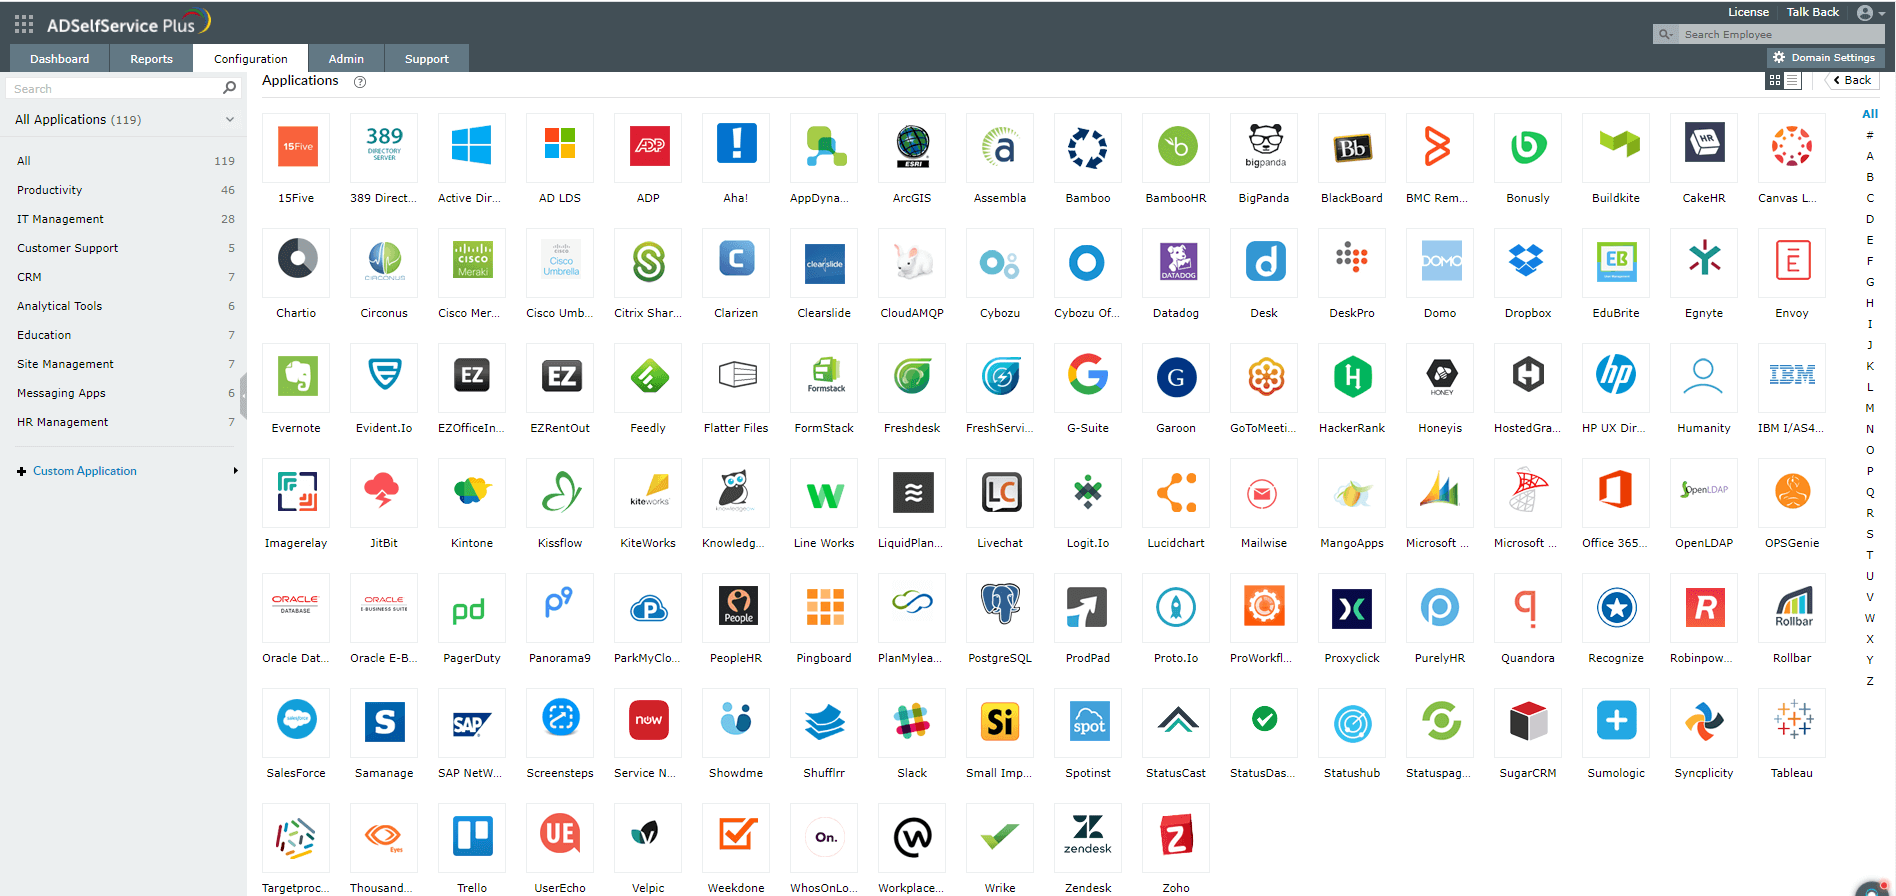 List of supported apps